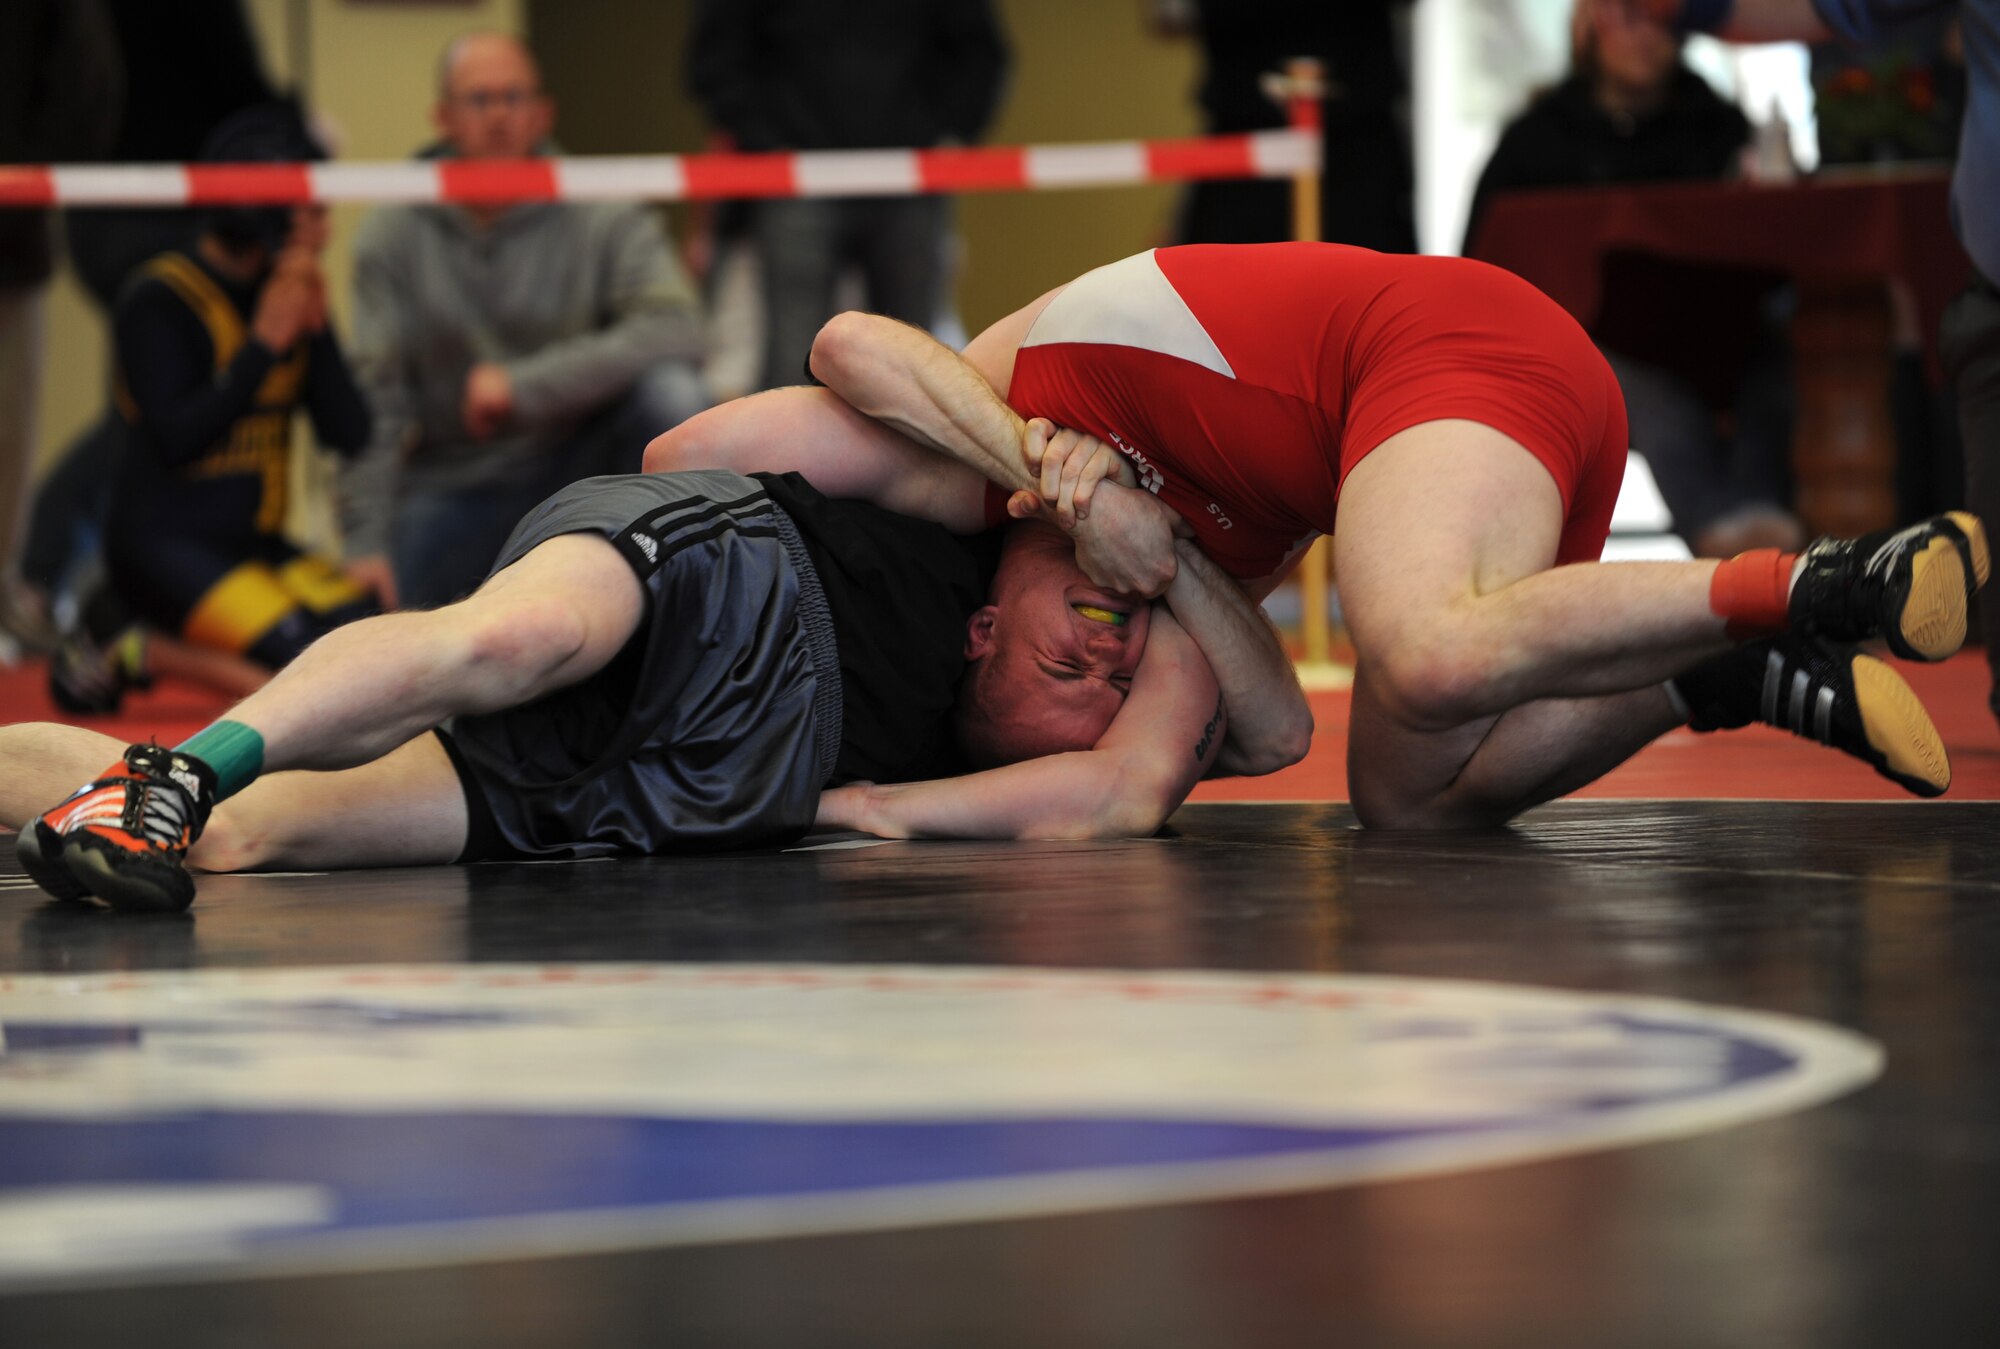 U.S. Air Force Senior Airman Philip Bean (Left), 86th Aircraft Maintenance Squadron, wrestles Airman 1st Class Christopher Reed, 86th Security Forces Squadron, in the Greco-Roman part of the U.S. Army Garrison Kaiserslautern invitational, Miesau Army Depot, Germany, March 12, 2011.  Both Airmen are from Ramstein AB.  Airman Reed won second place for Greco-Roman in his weight division. Wrestlers from Ramstein, Aviano, K-town, Landstuhl Regional Medical Center, Baumholder, and Wiesbaden all took part in the invitational. Ramstein won the invitational with 102 points. (U.S. Air Force photo by Senior Airman Caleb Pierce)